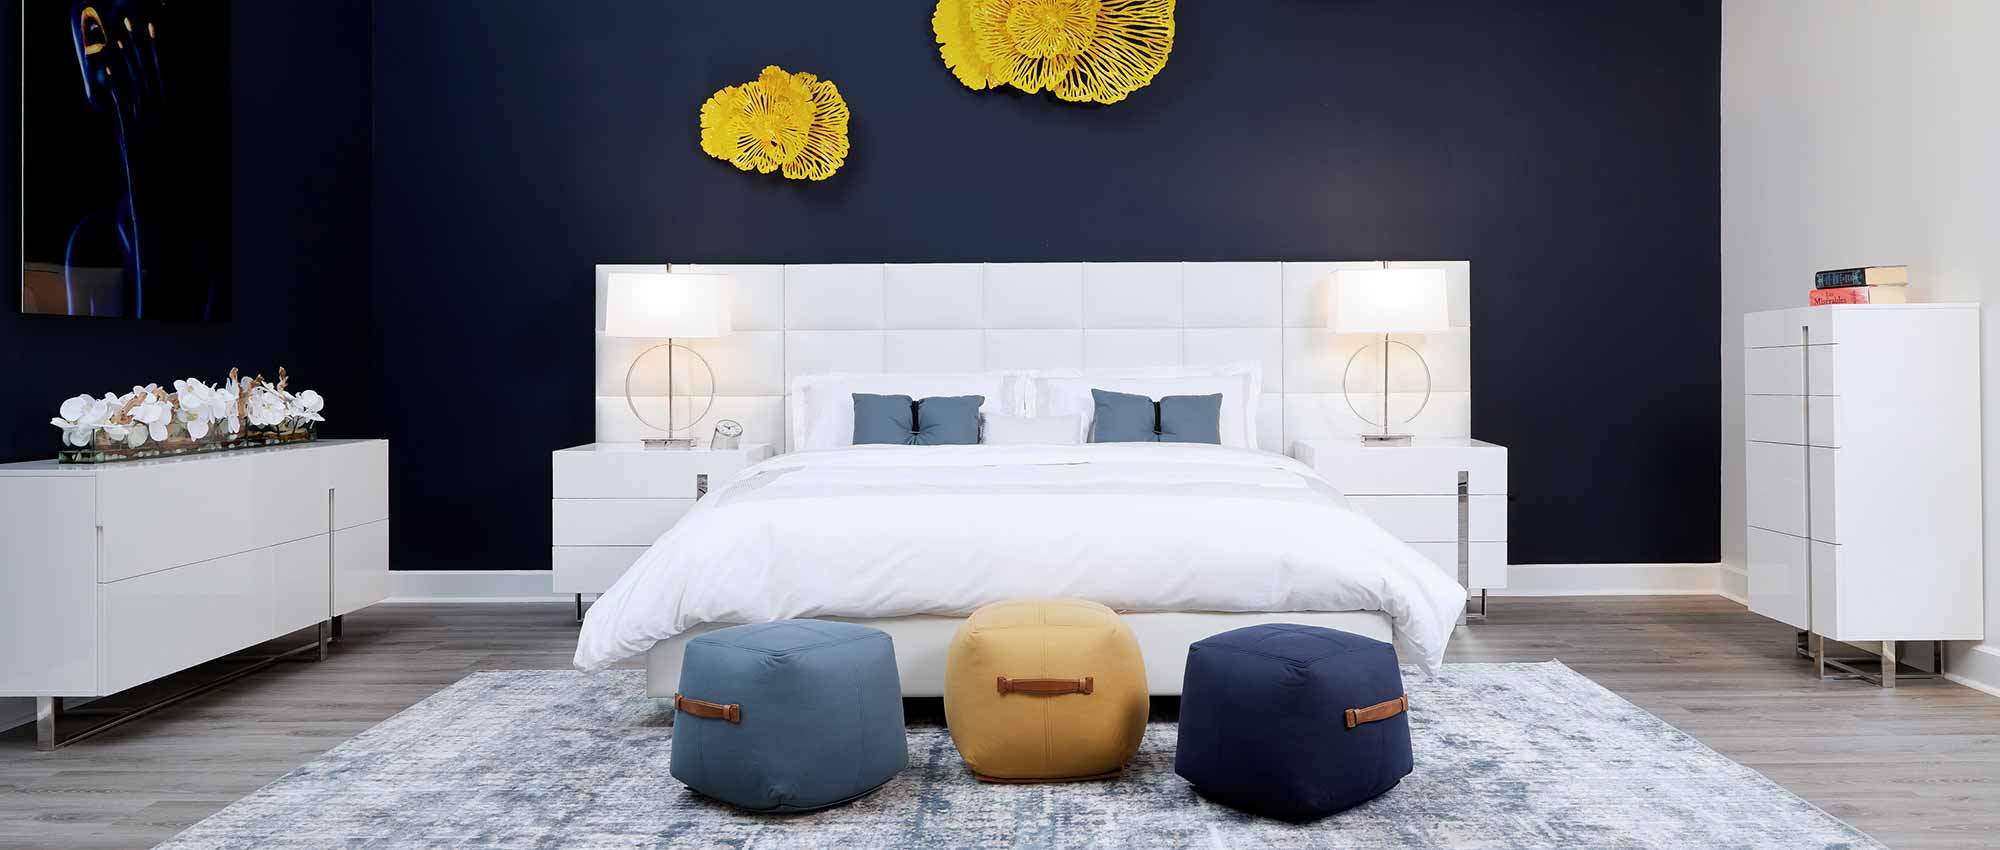  A modern bedroom with a white eco-leather bed, a white nightstand, and a white dresser. The walls are decorated with modern art. The bed is covered in a white duvet, and there are two pillows in shades of blue. The nightstand has a modern lamp, and a clock. The overall style of the room is clean and modern.